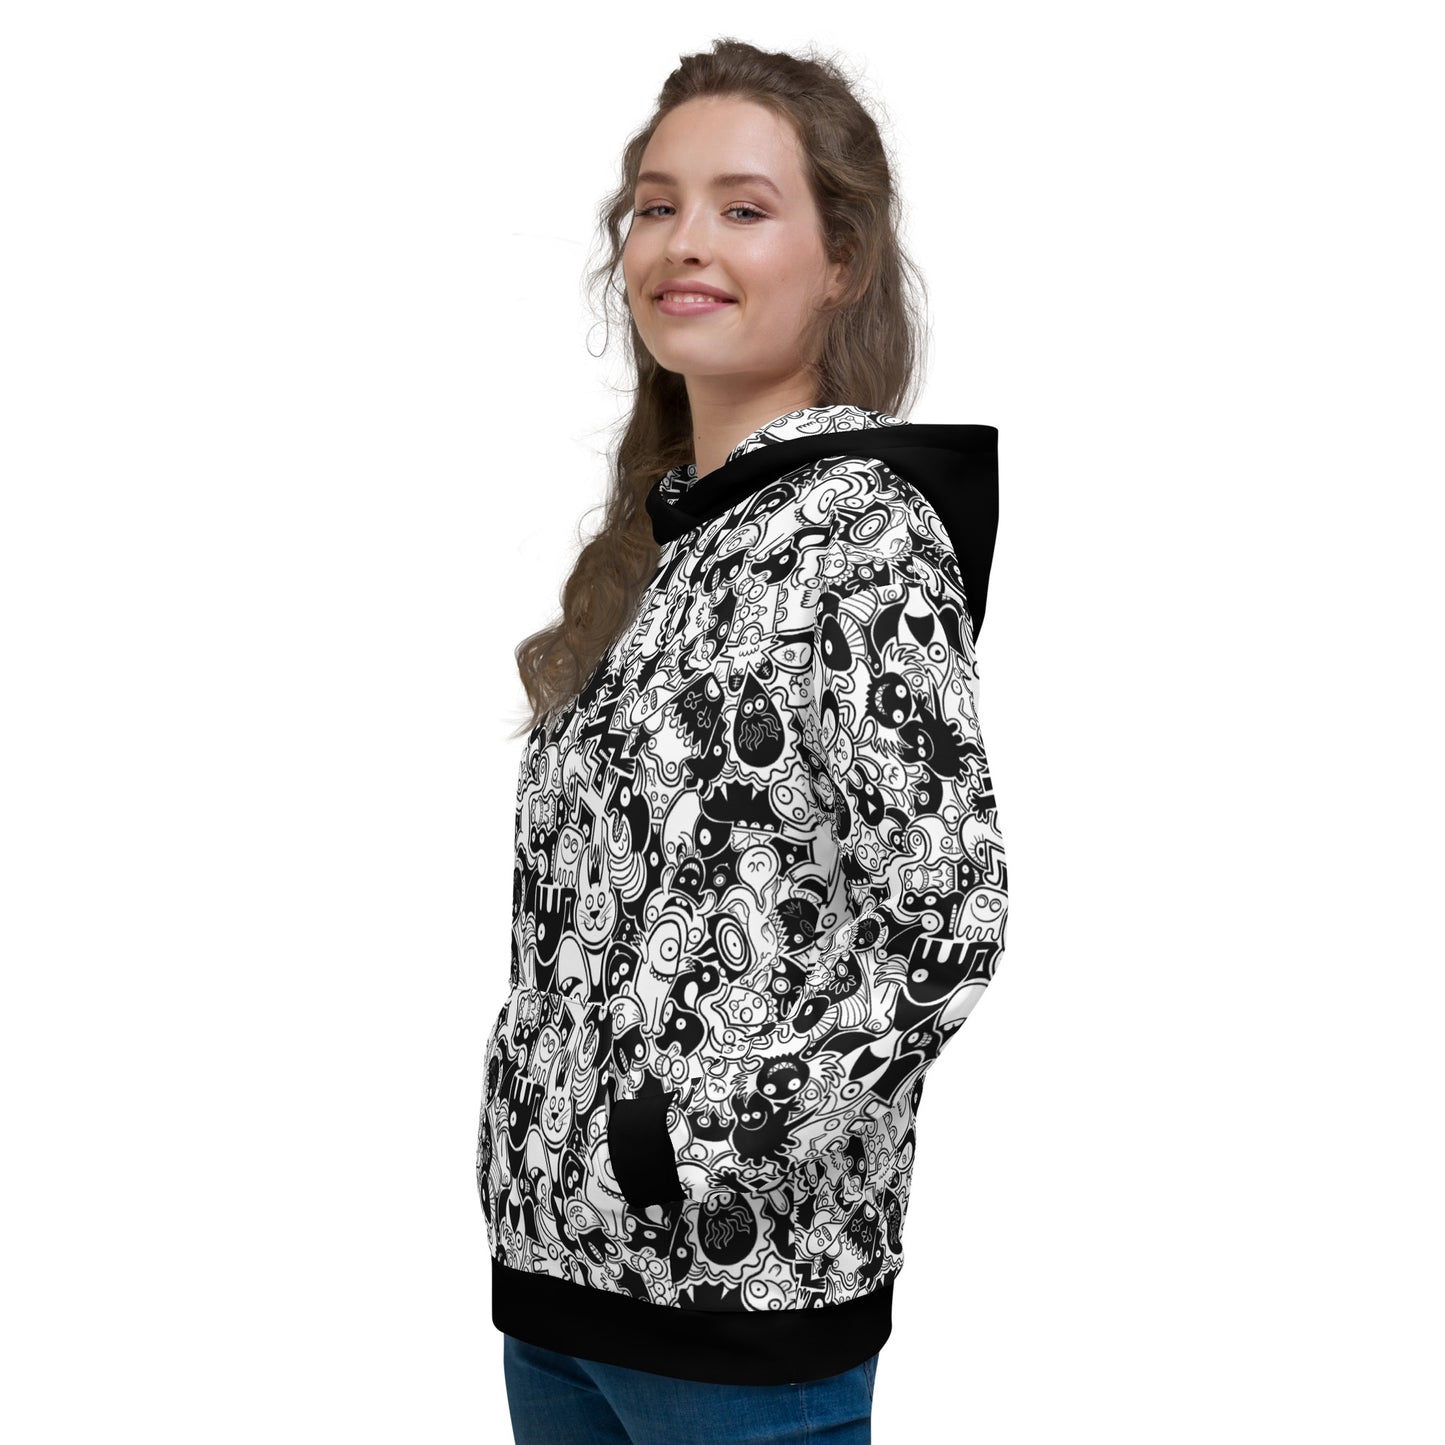 Beautiful woman wearing Unisex Hoodie All-over printed with Joyful crowd of black and white doodle creatures